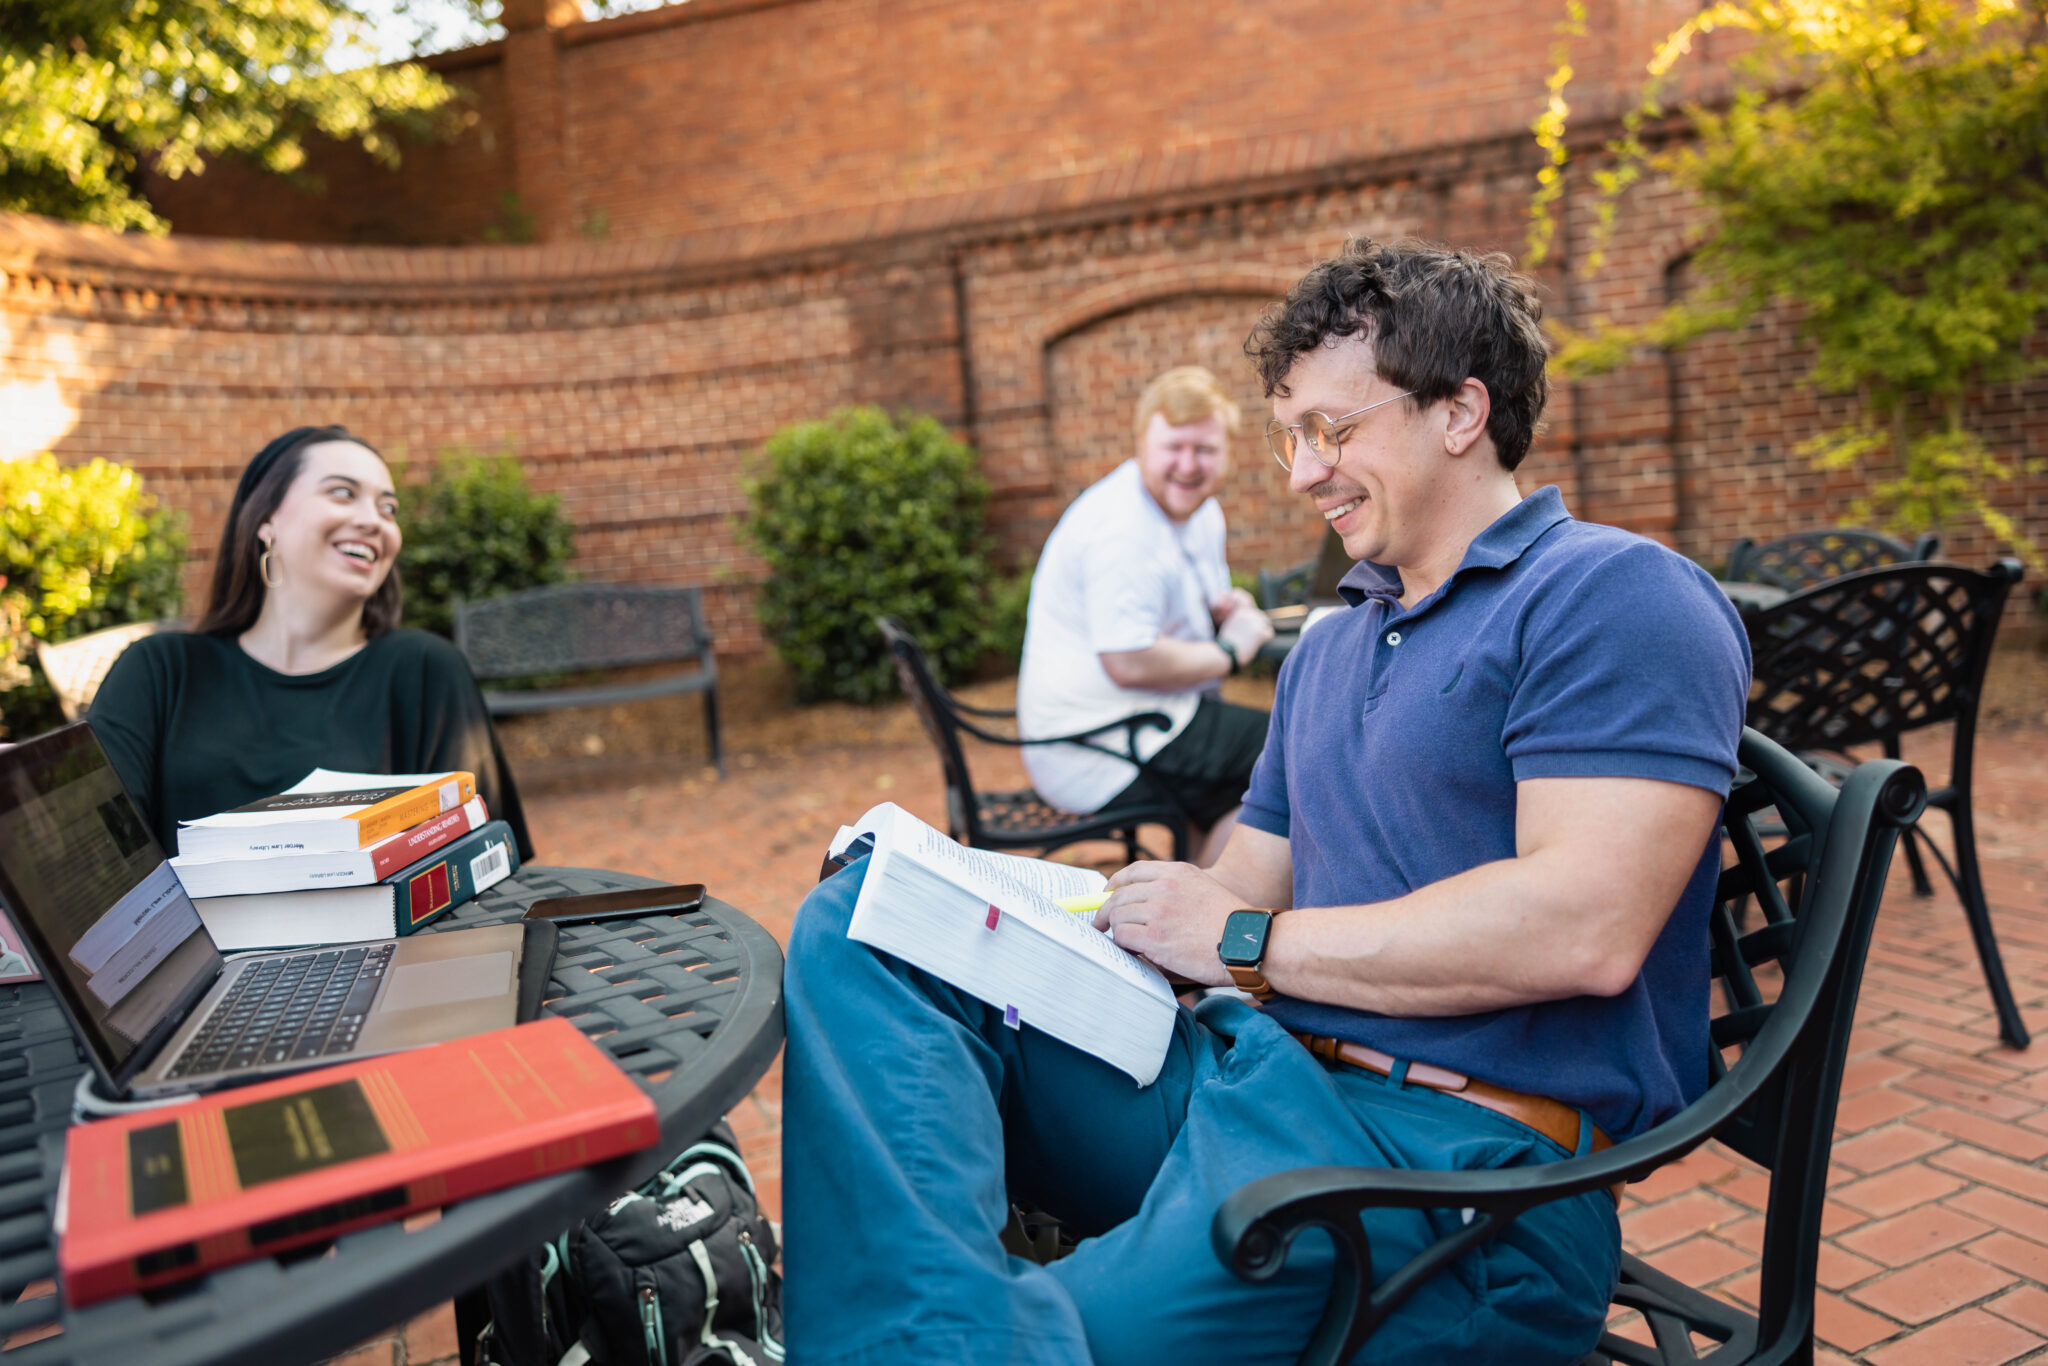 Three students reading books and laughing at an outside table